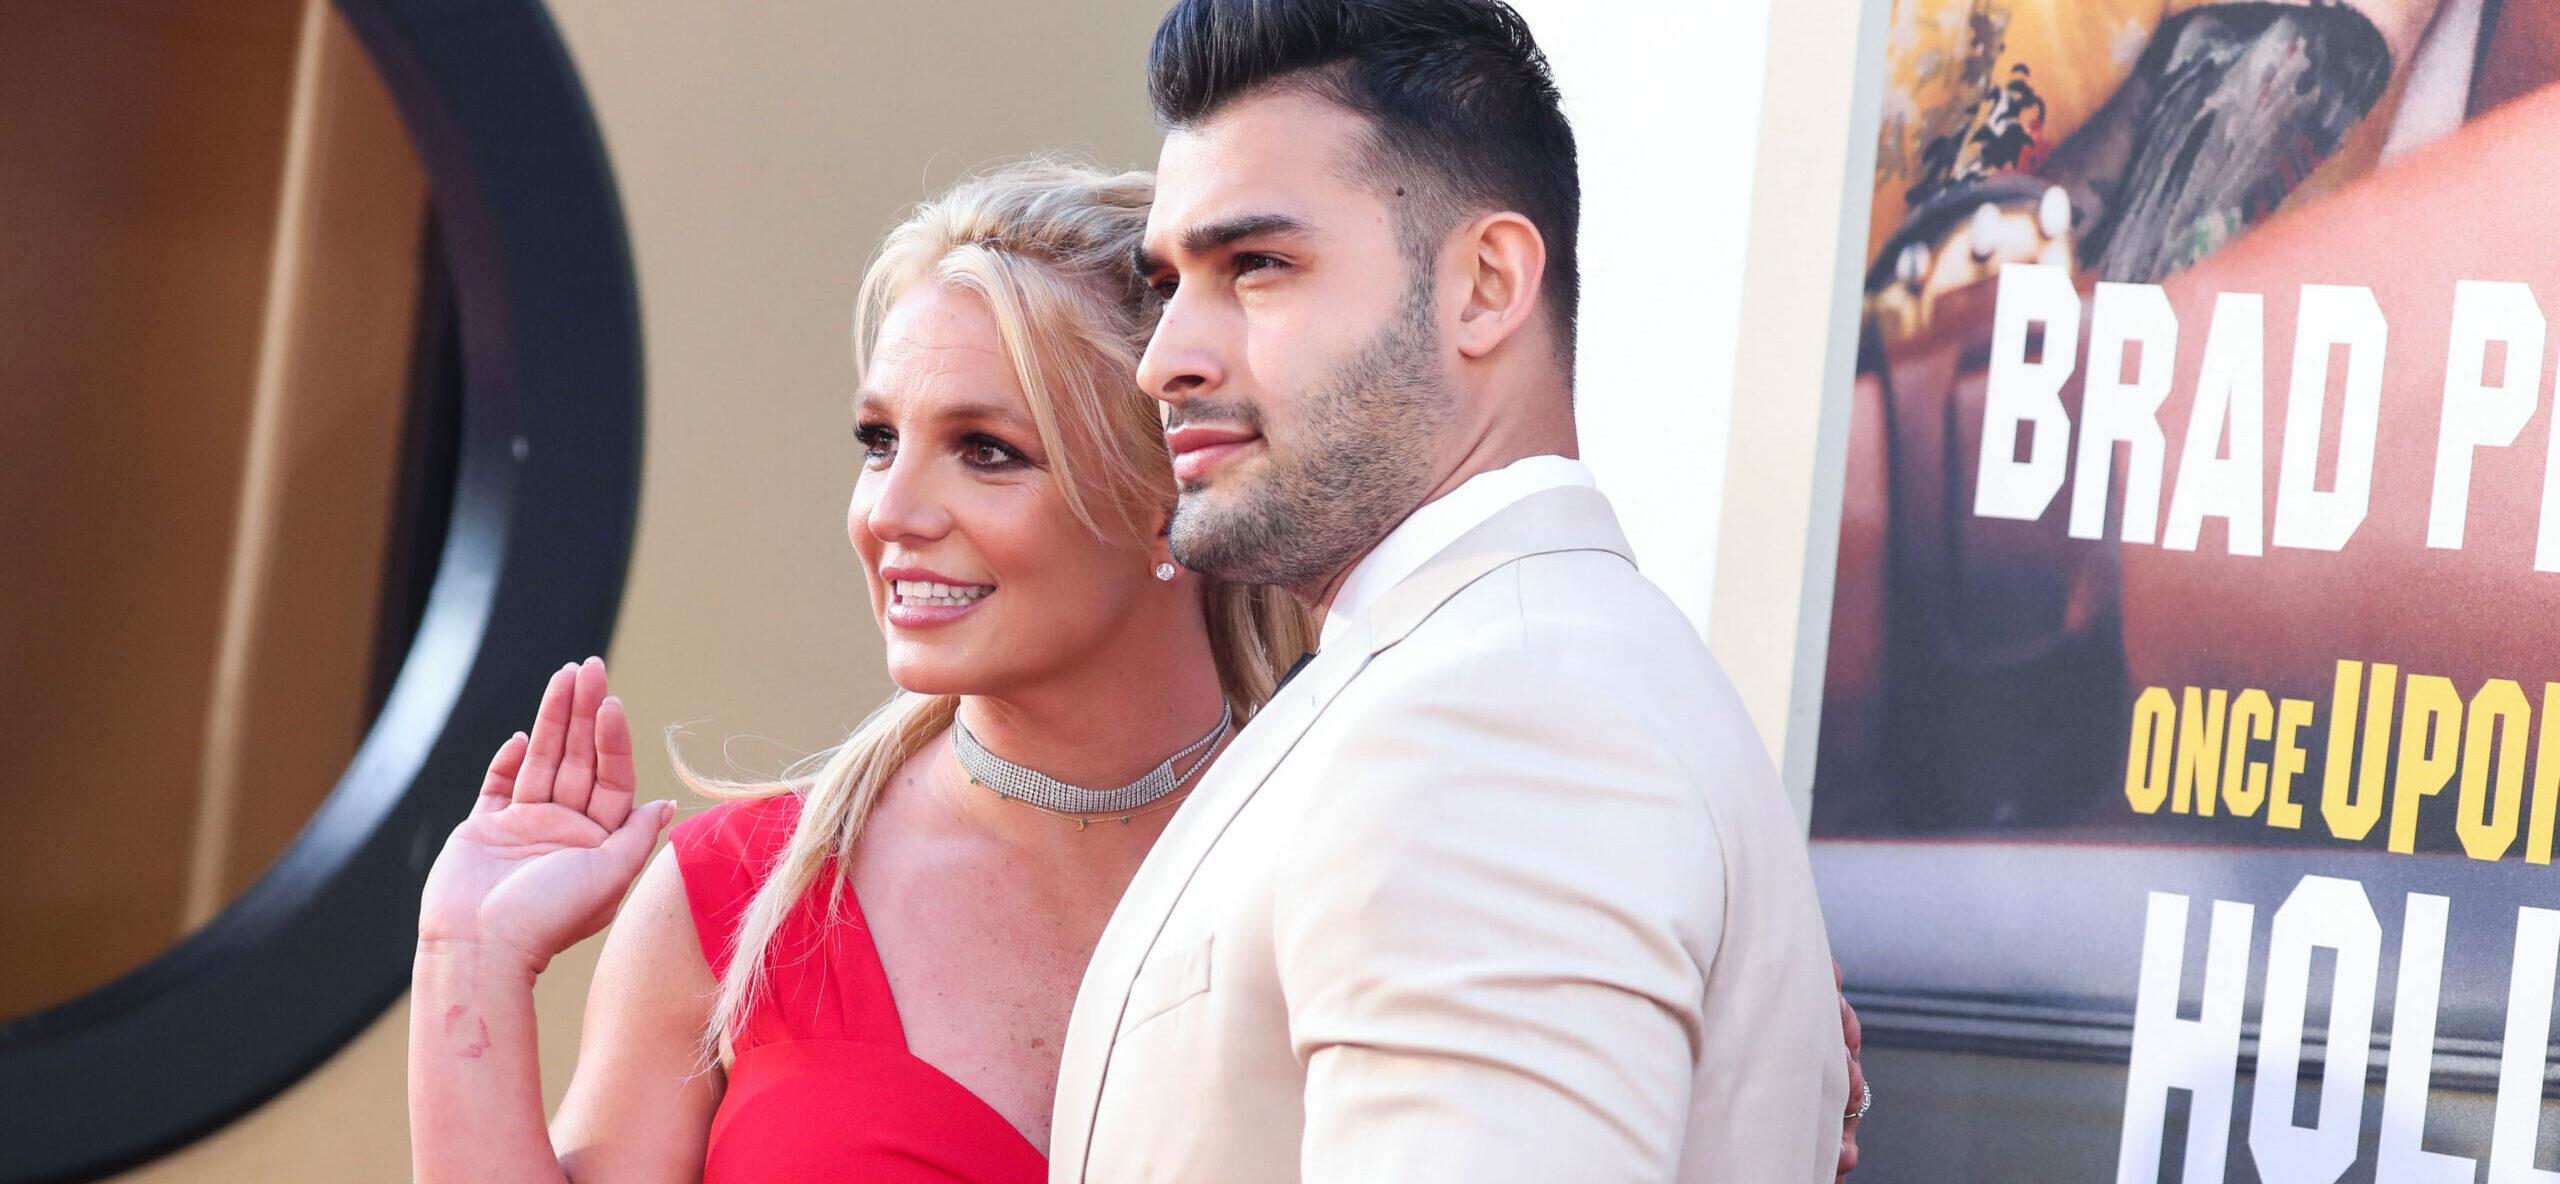 Britney Spears’ Fiancé Flaunts His RIPPED Post-Thanksgiving Physique!